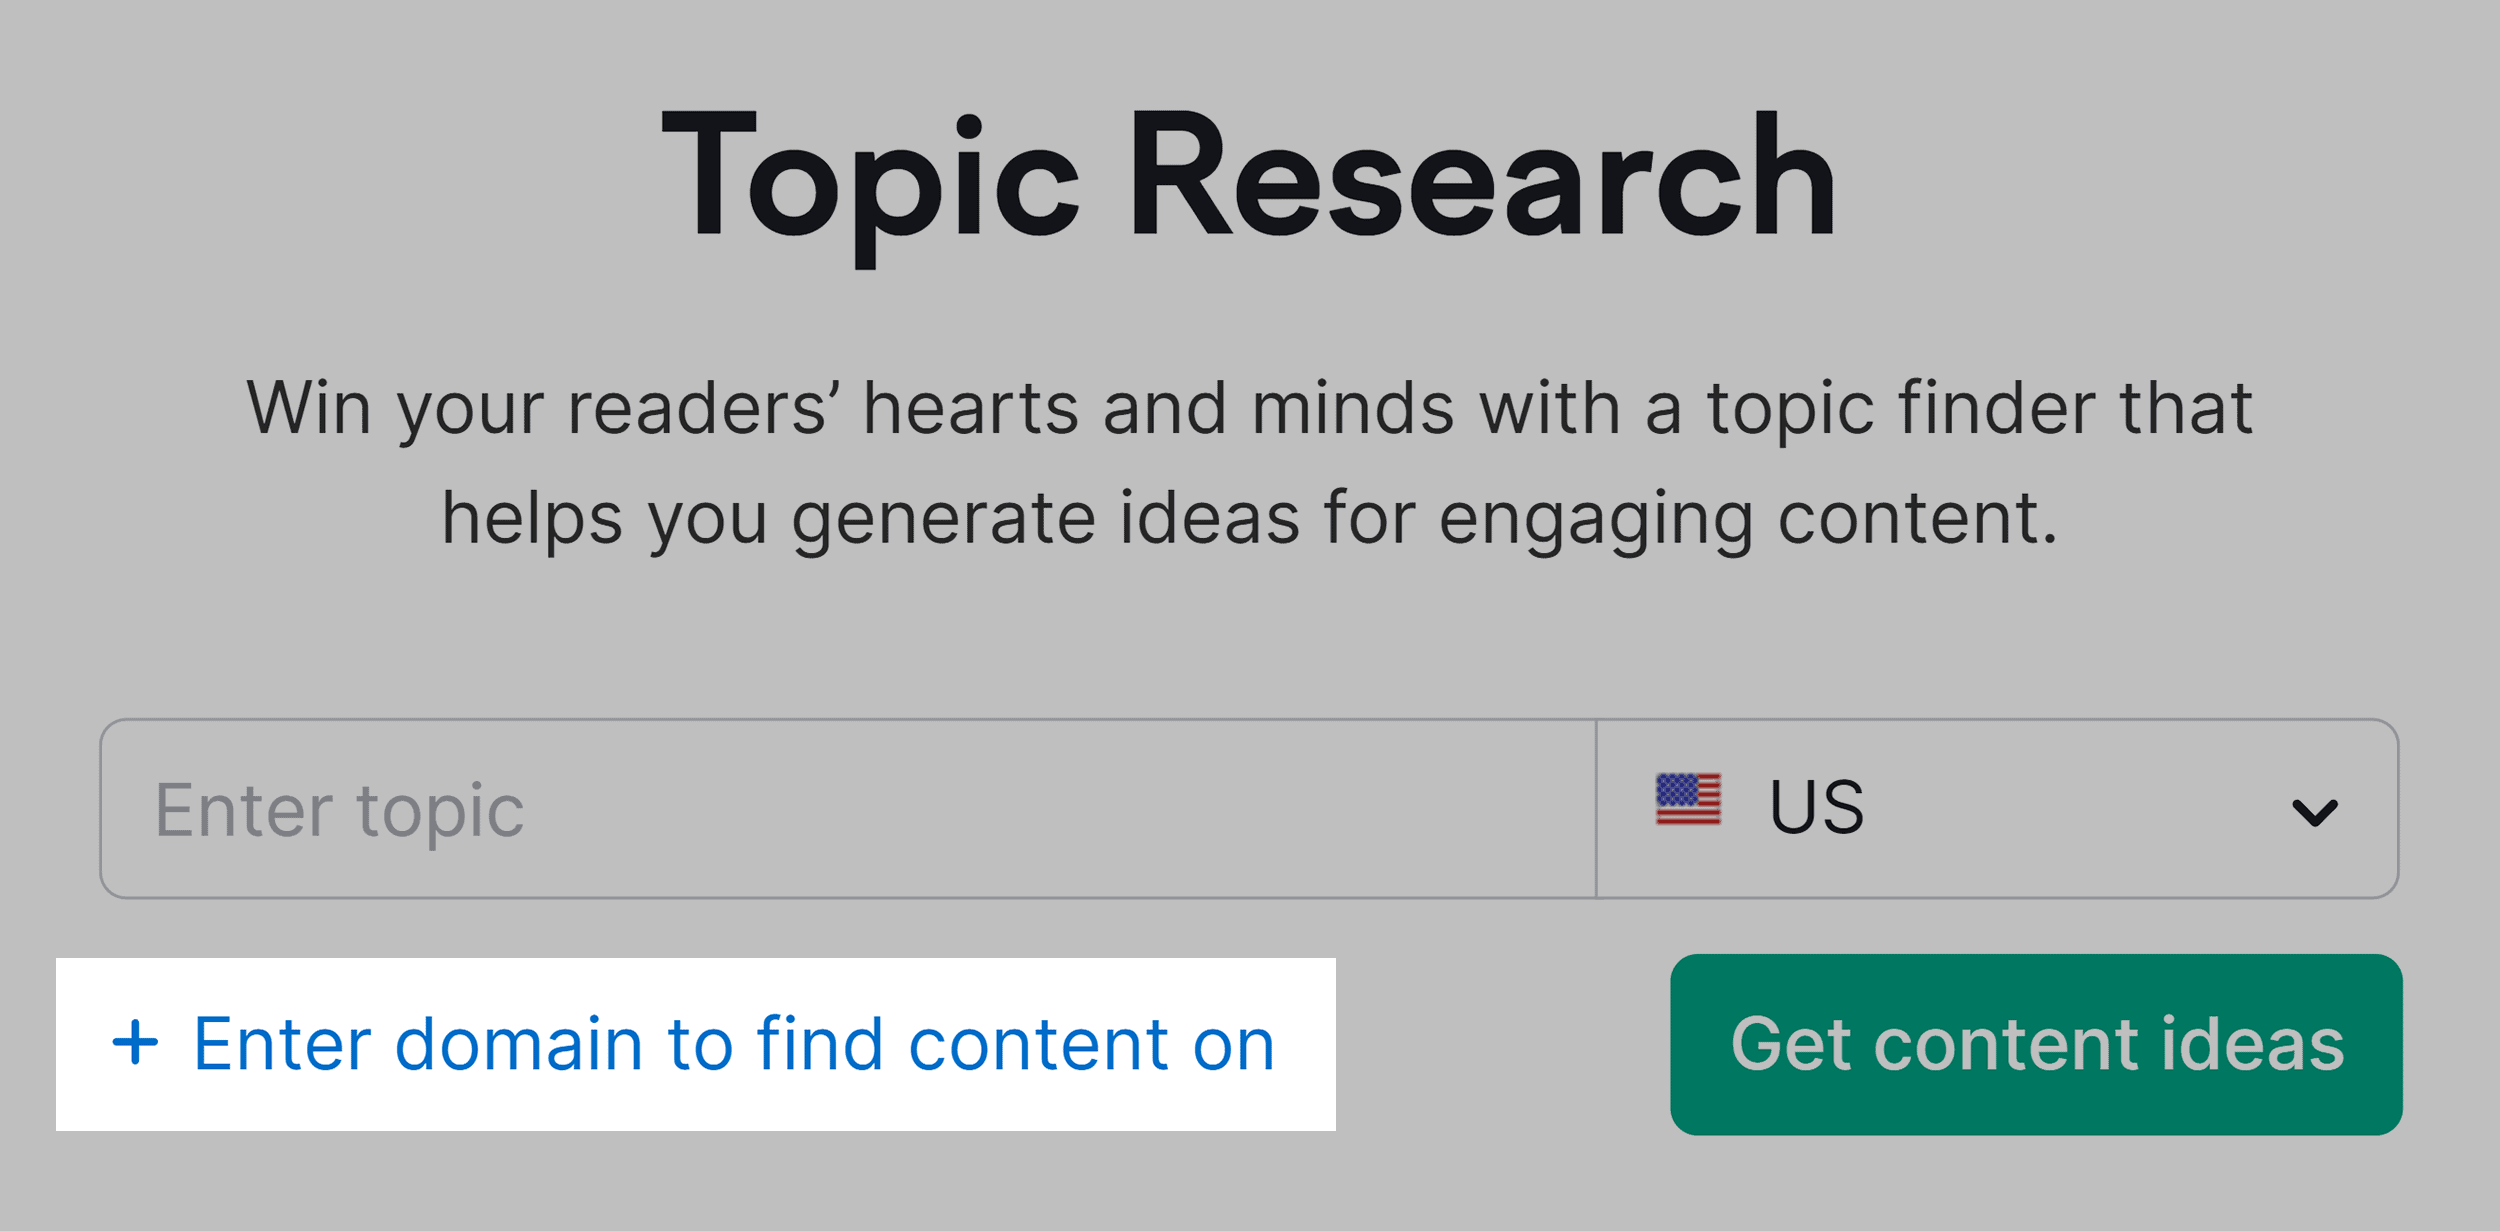 Topic Research – Enter domain